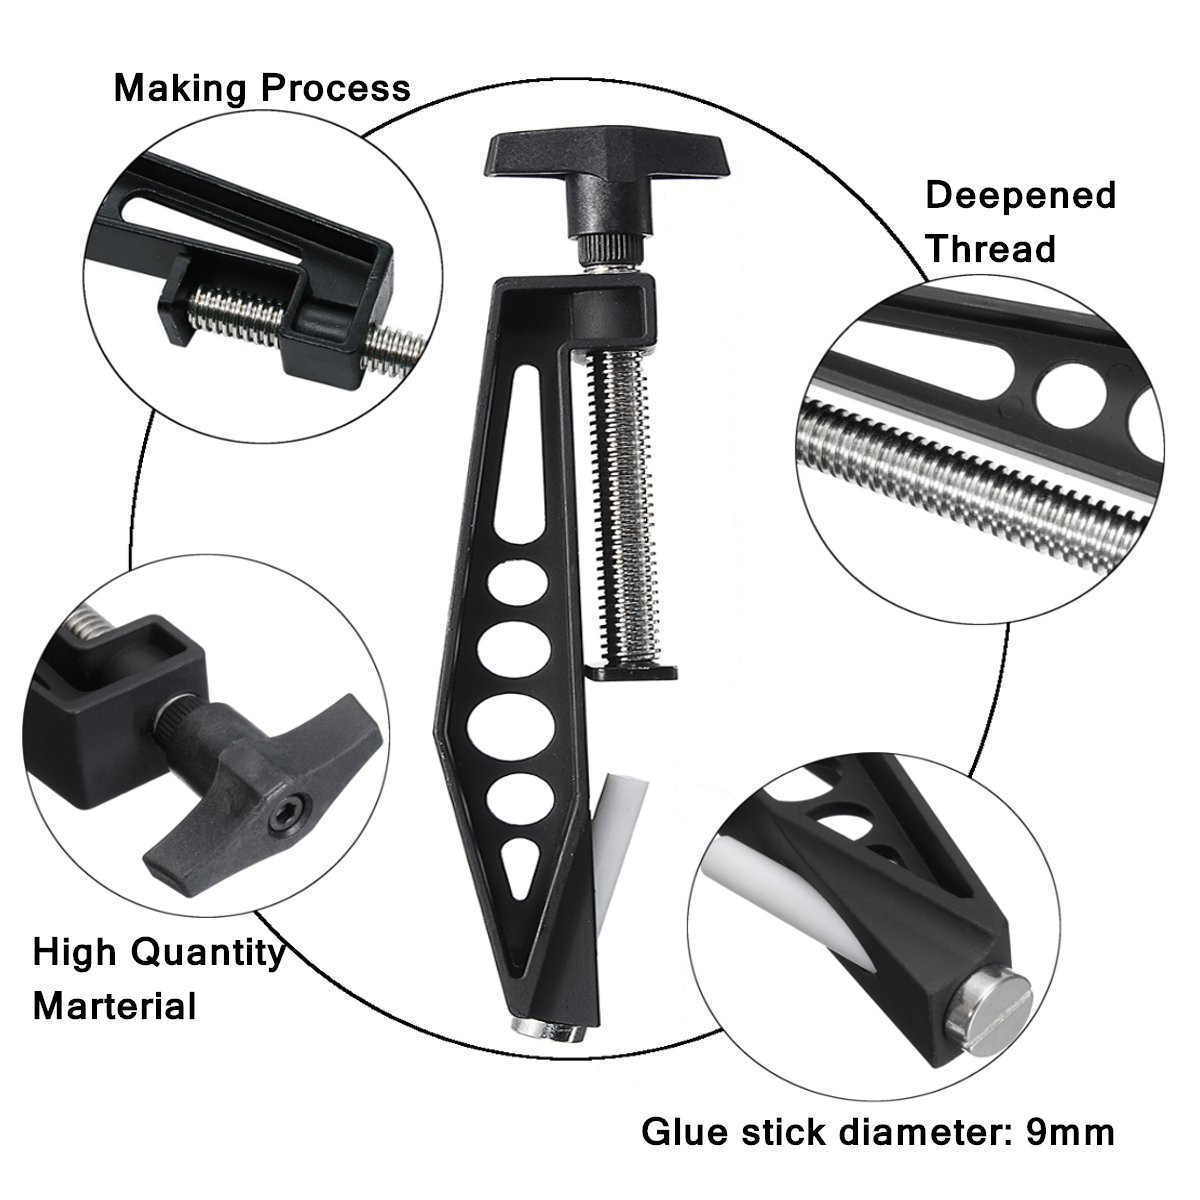 Drillpro-Woodworking-Pocket-Hole-Jig-Joint-Fixed-Clamp-Slant-Hole-Pull-Clip-1222170-4